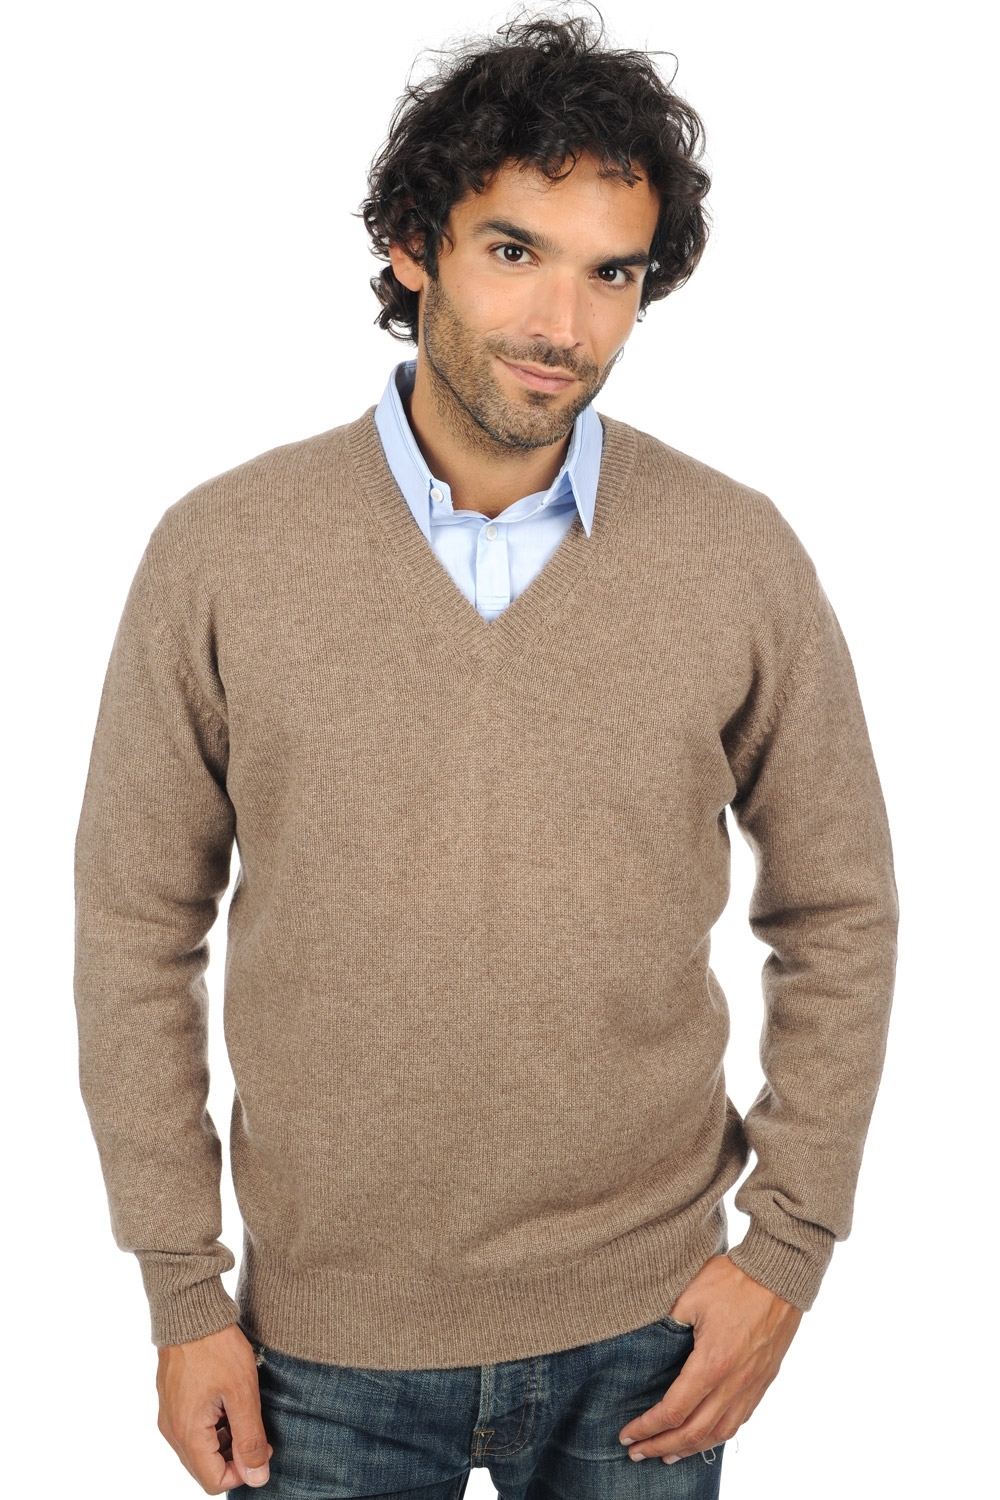 Cachemire pull homme epais hippolyte 4f natural brown s